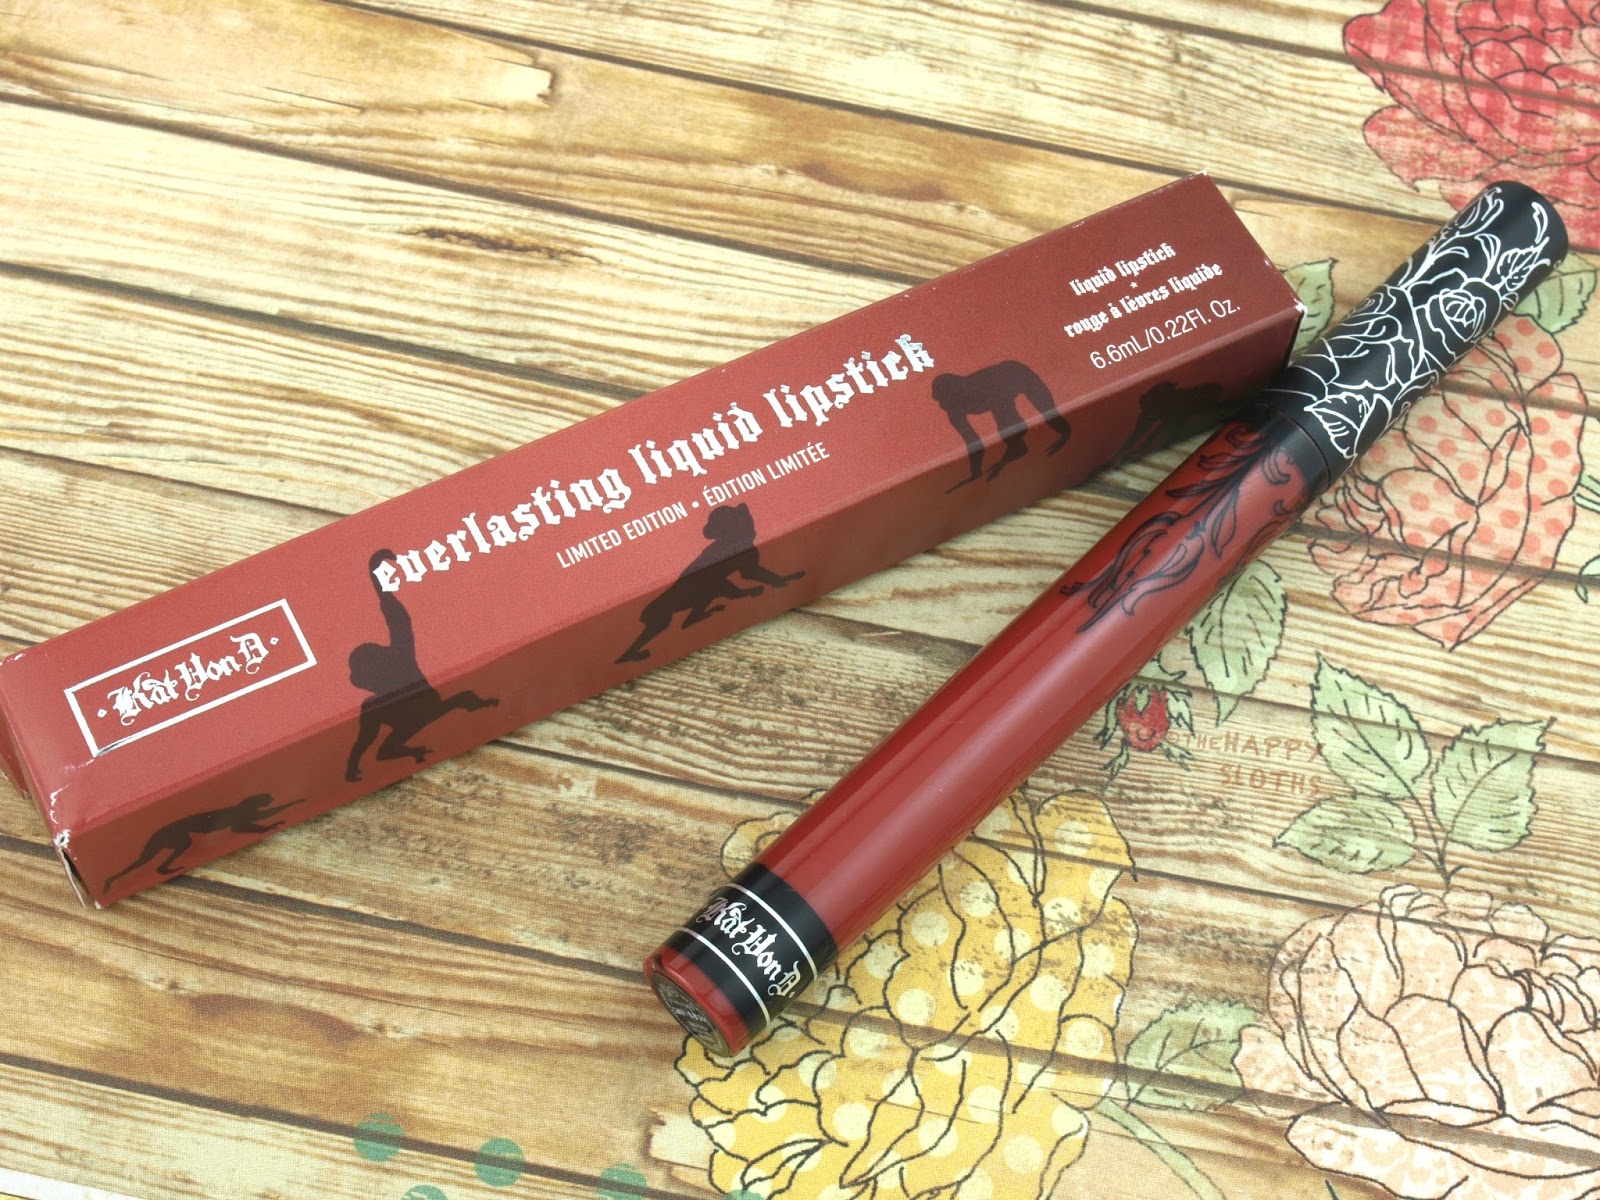 Kat Von D Everlasting Liquid Lipstick in Chimps": Review and Swatches | The Happy Sloths: Beauty, Skincare with Reviews and Swatches